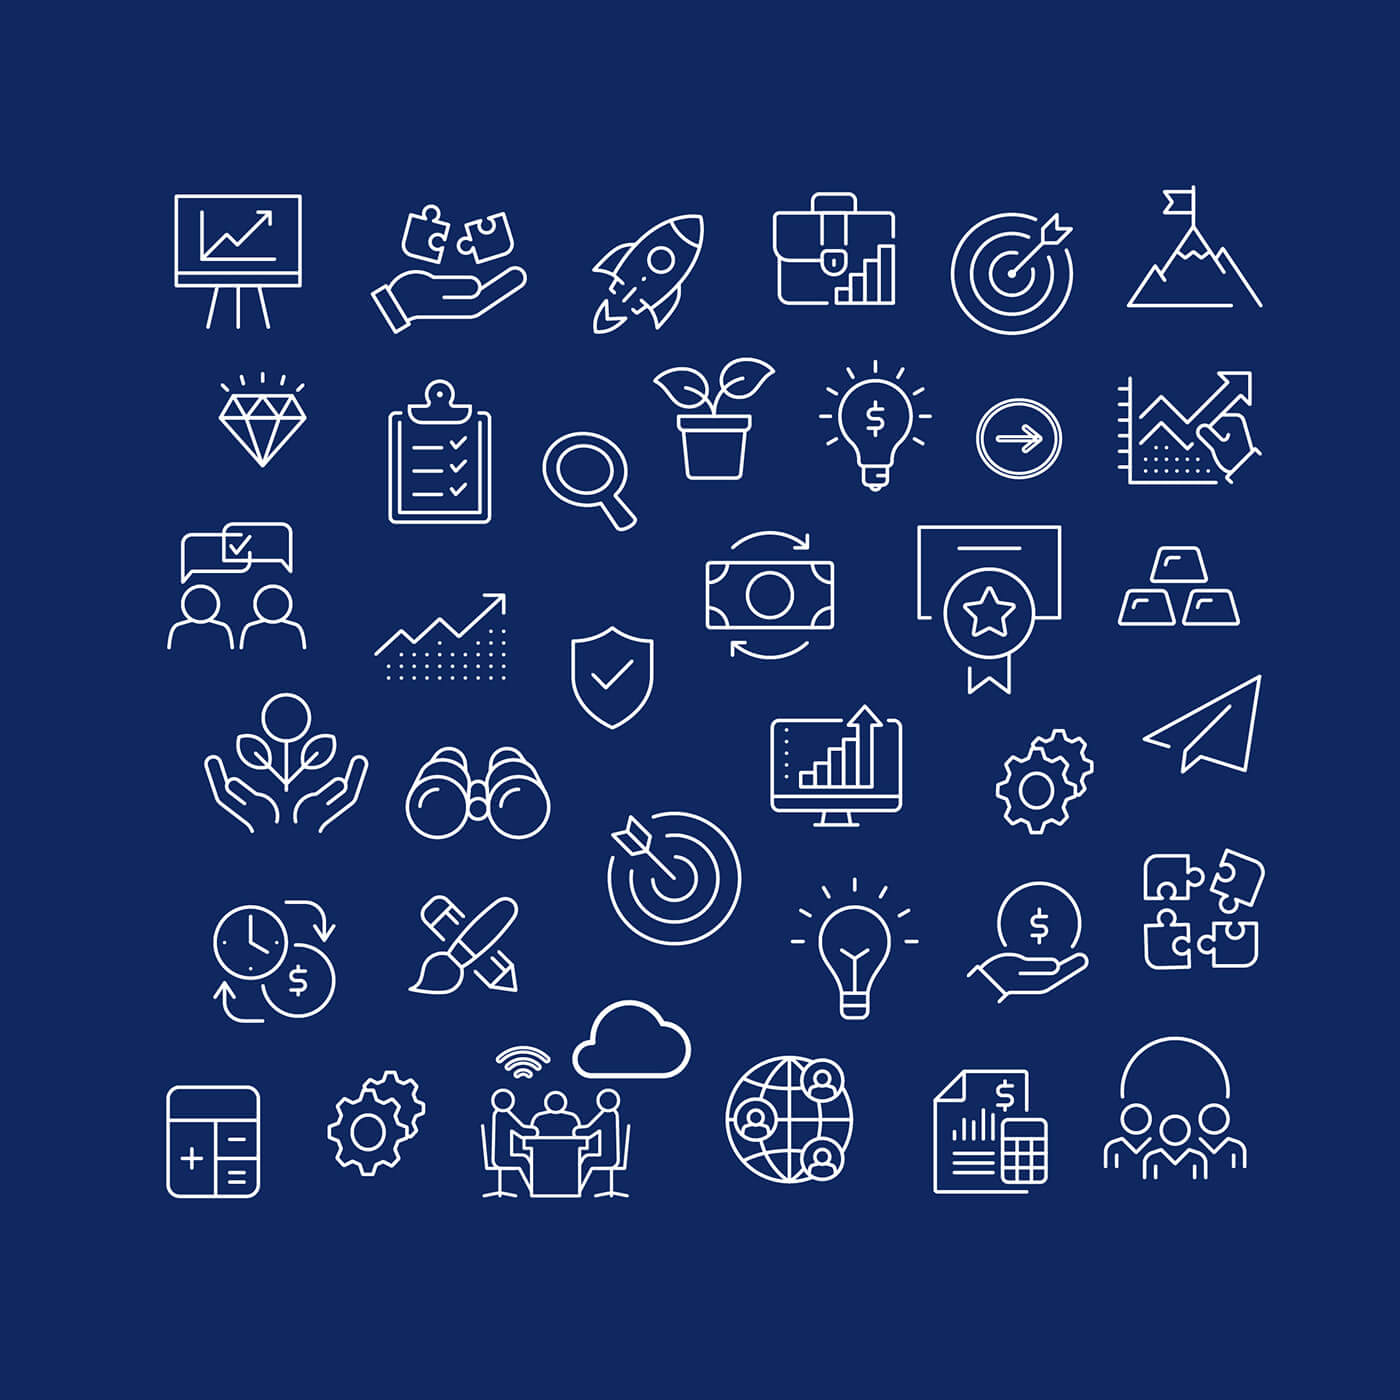 Business success icons on dark blue background